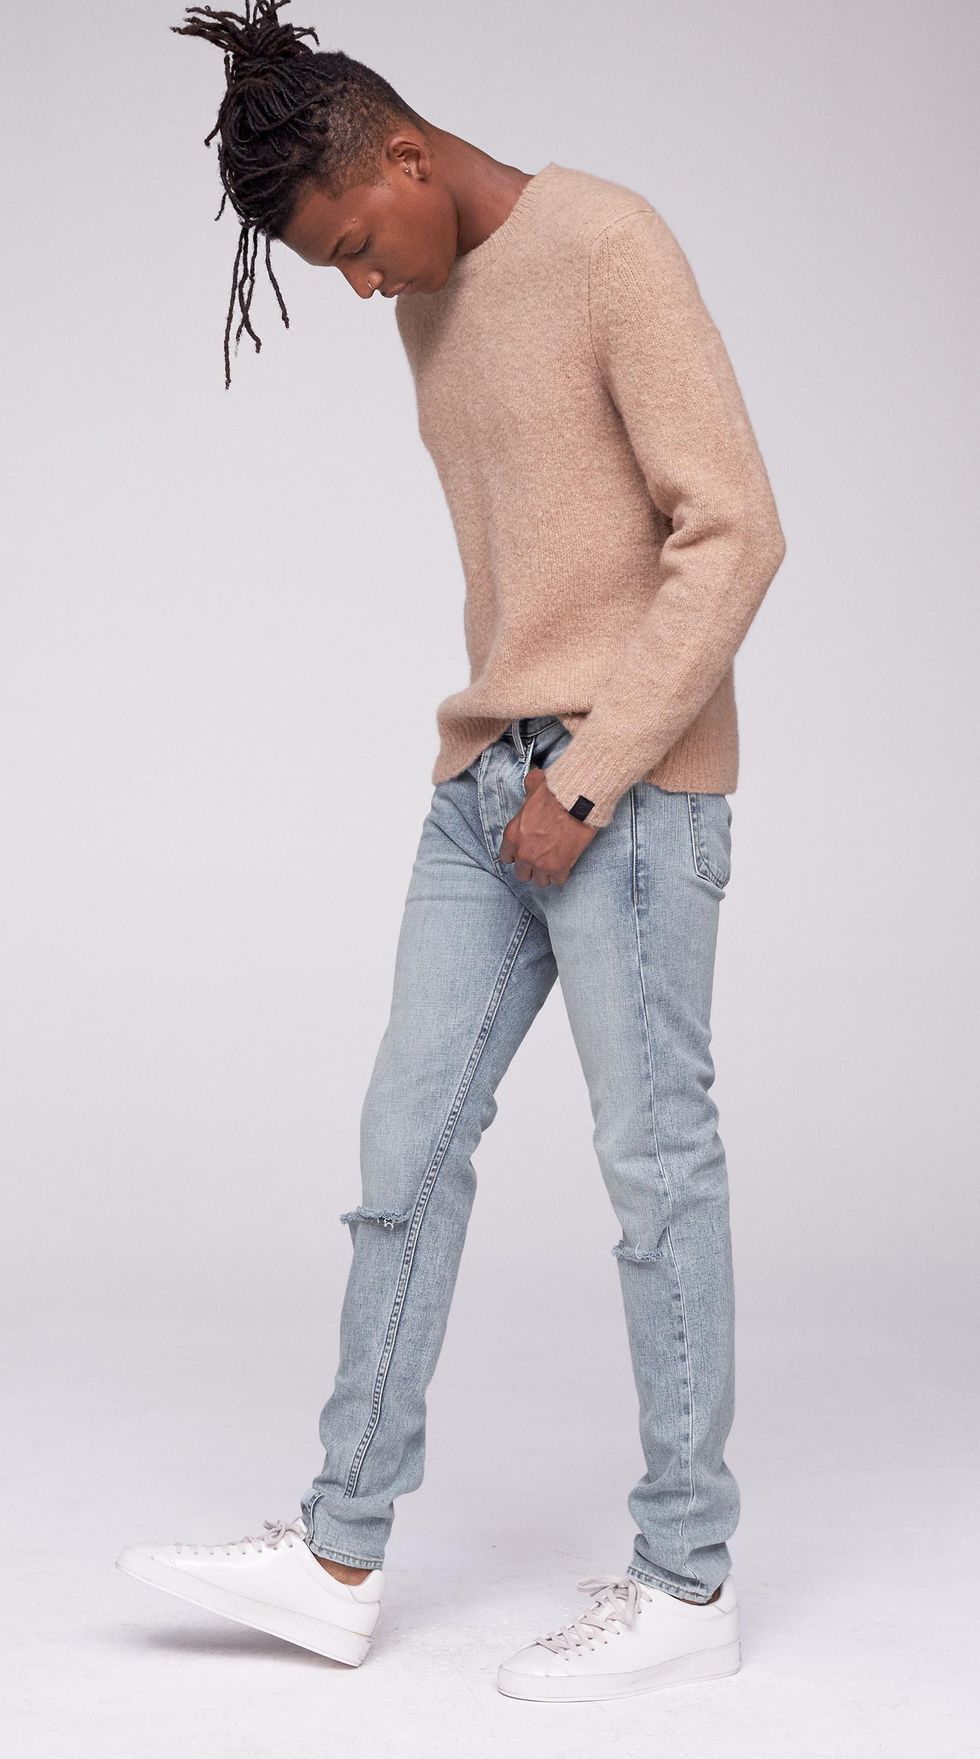 Jeans, White, Denim, Clothing, Standing, Muscle, Fashion, Human, Shoulder, Neck, 